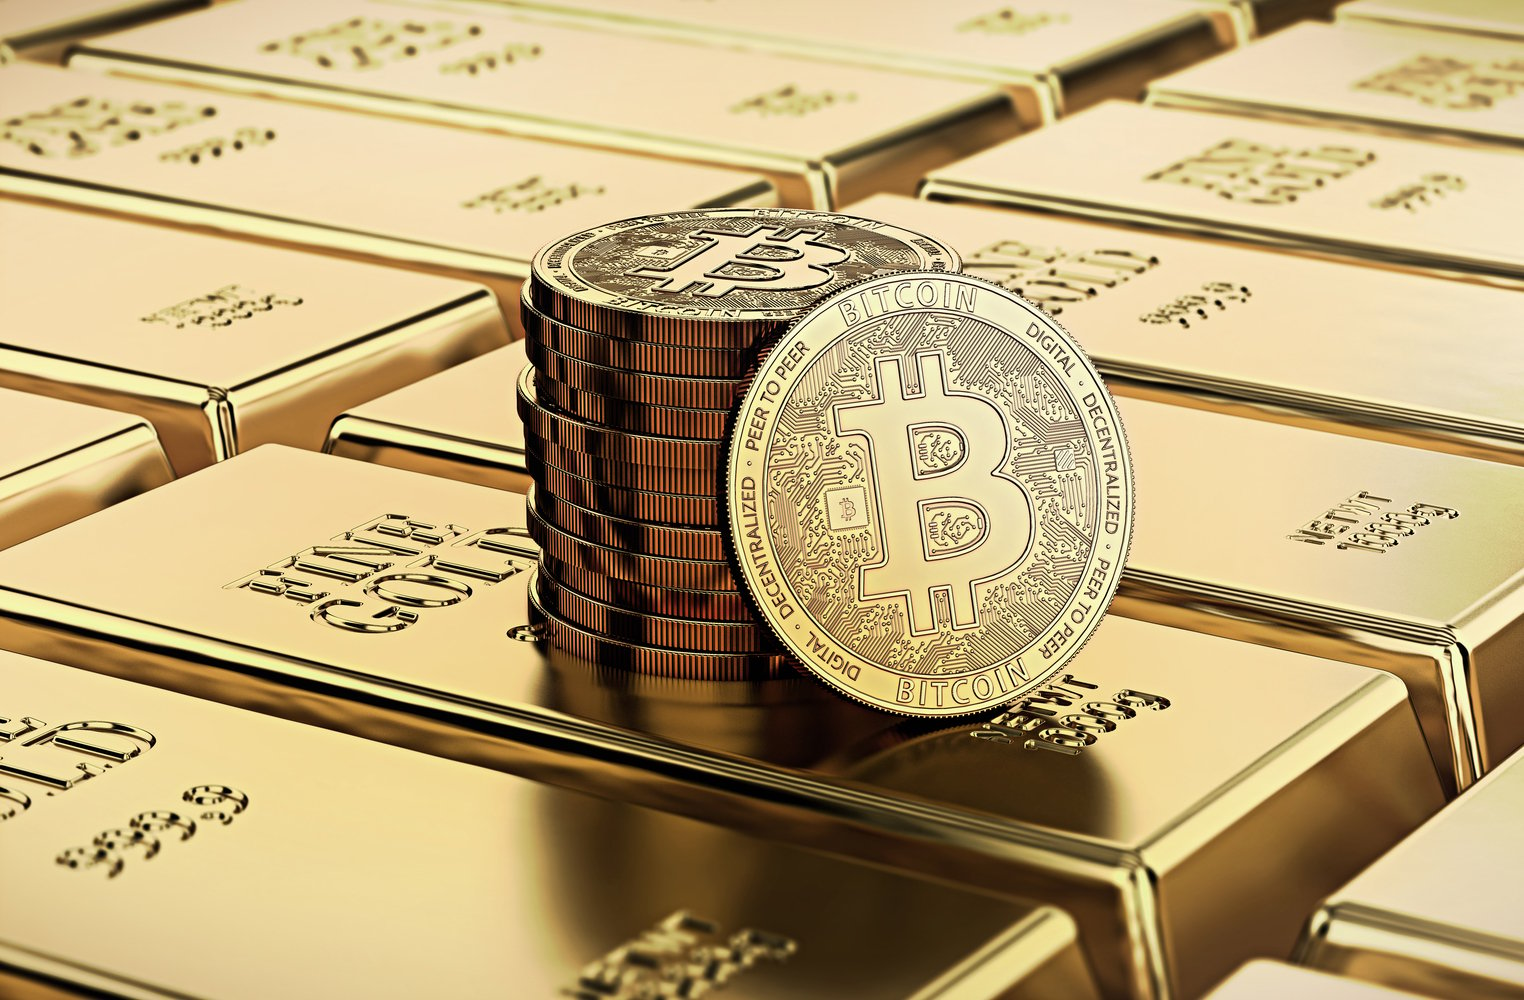 When Bitcoin Overtakes Gold - How High Can It Go?